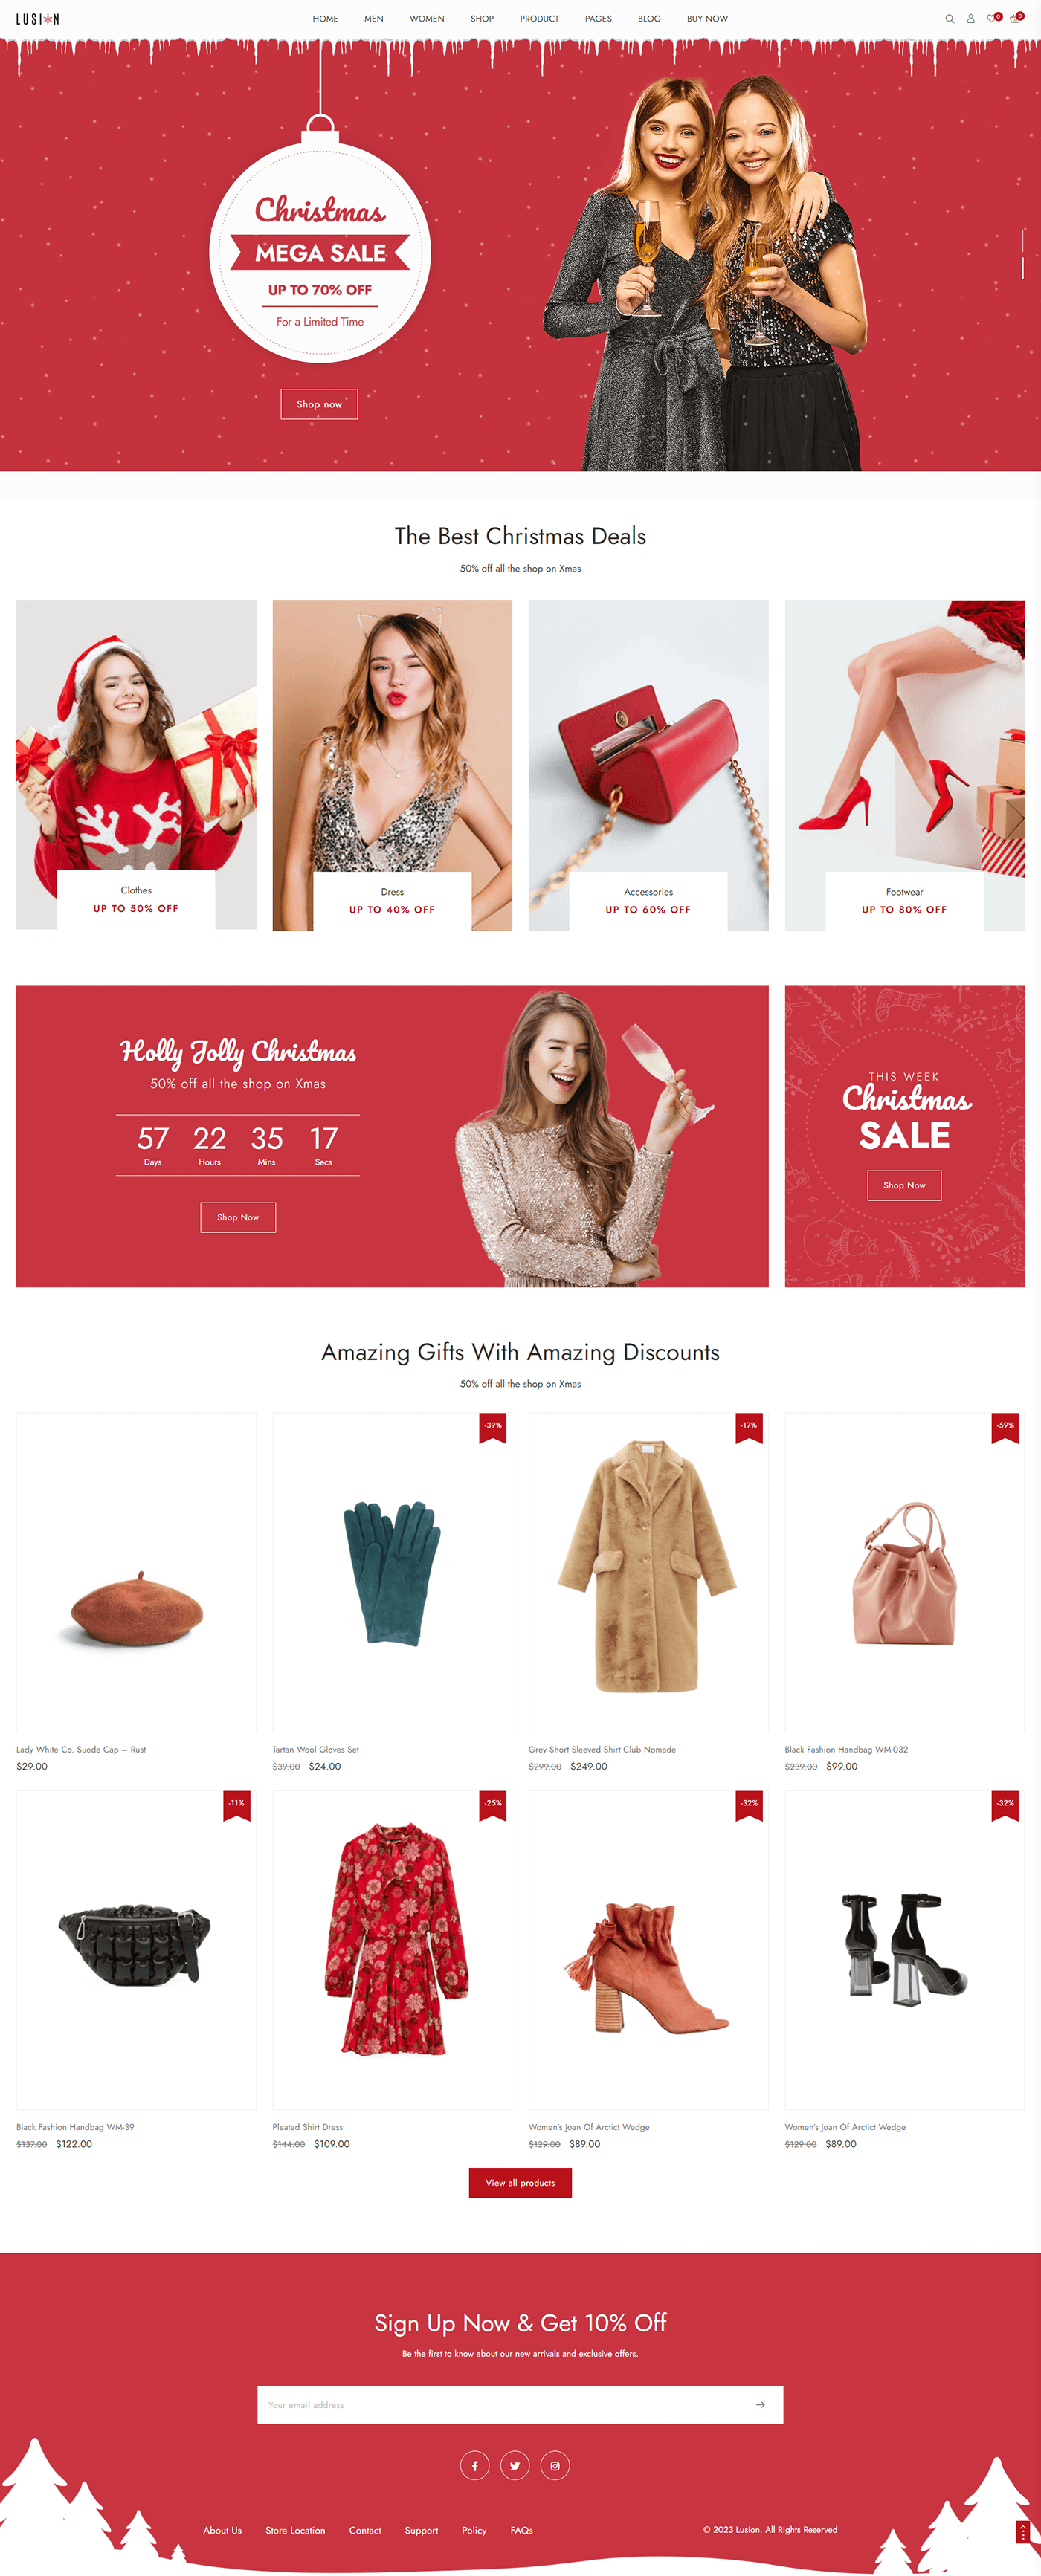 Shopify website design, Shopify store design, Shopify dropshipping store, shopify eCommerce website,